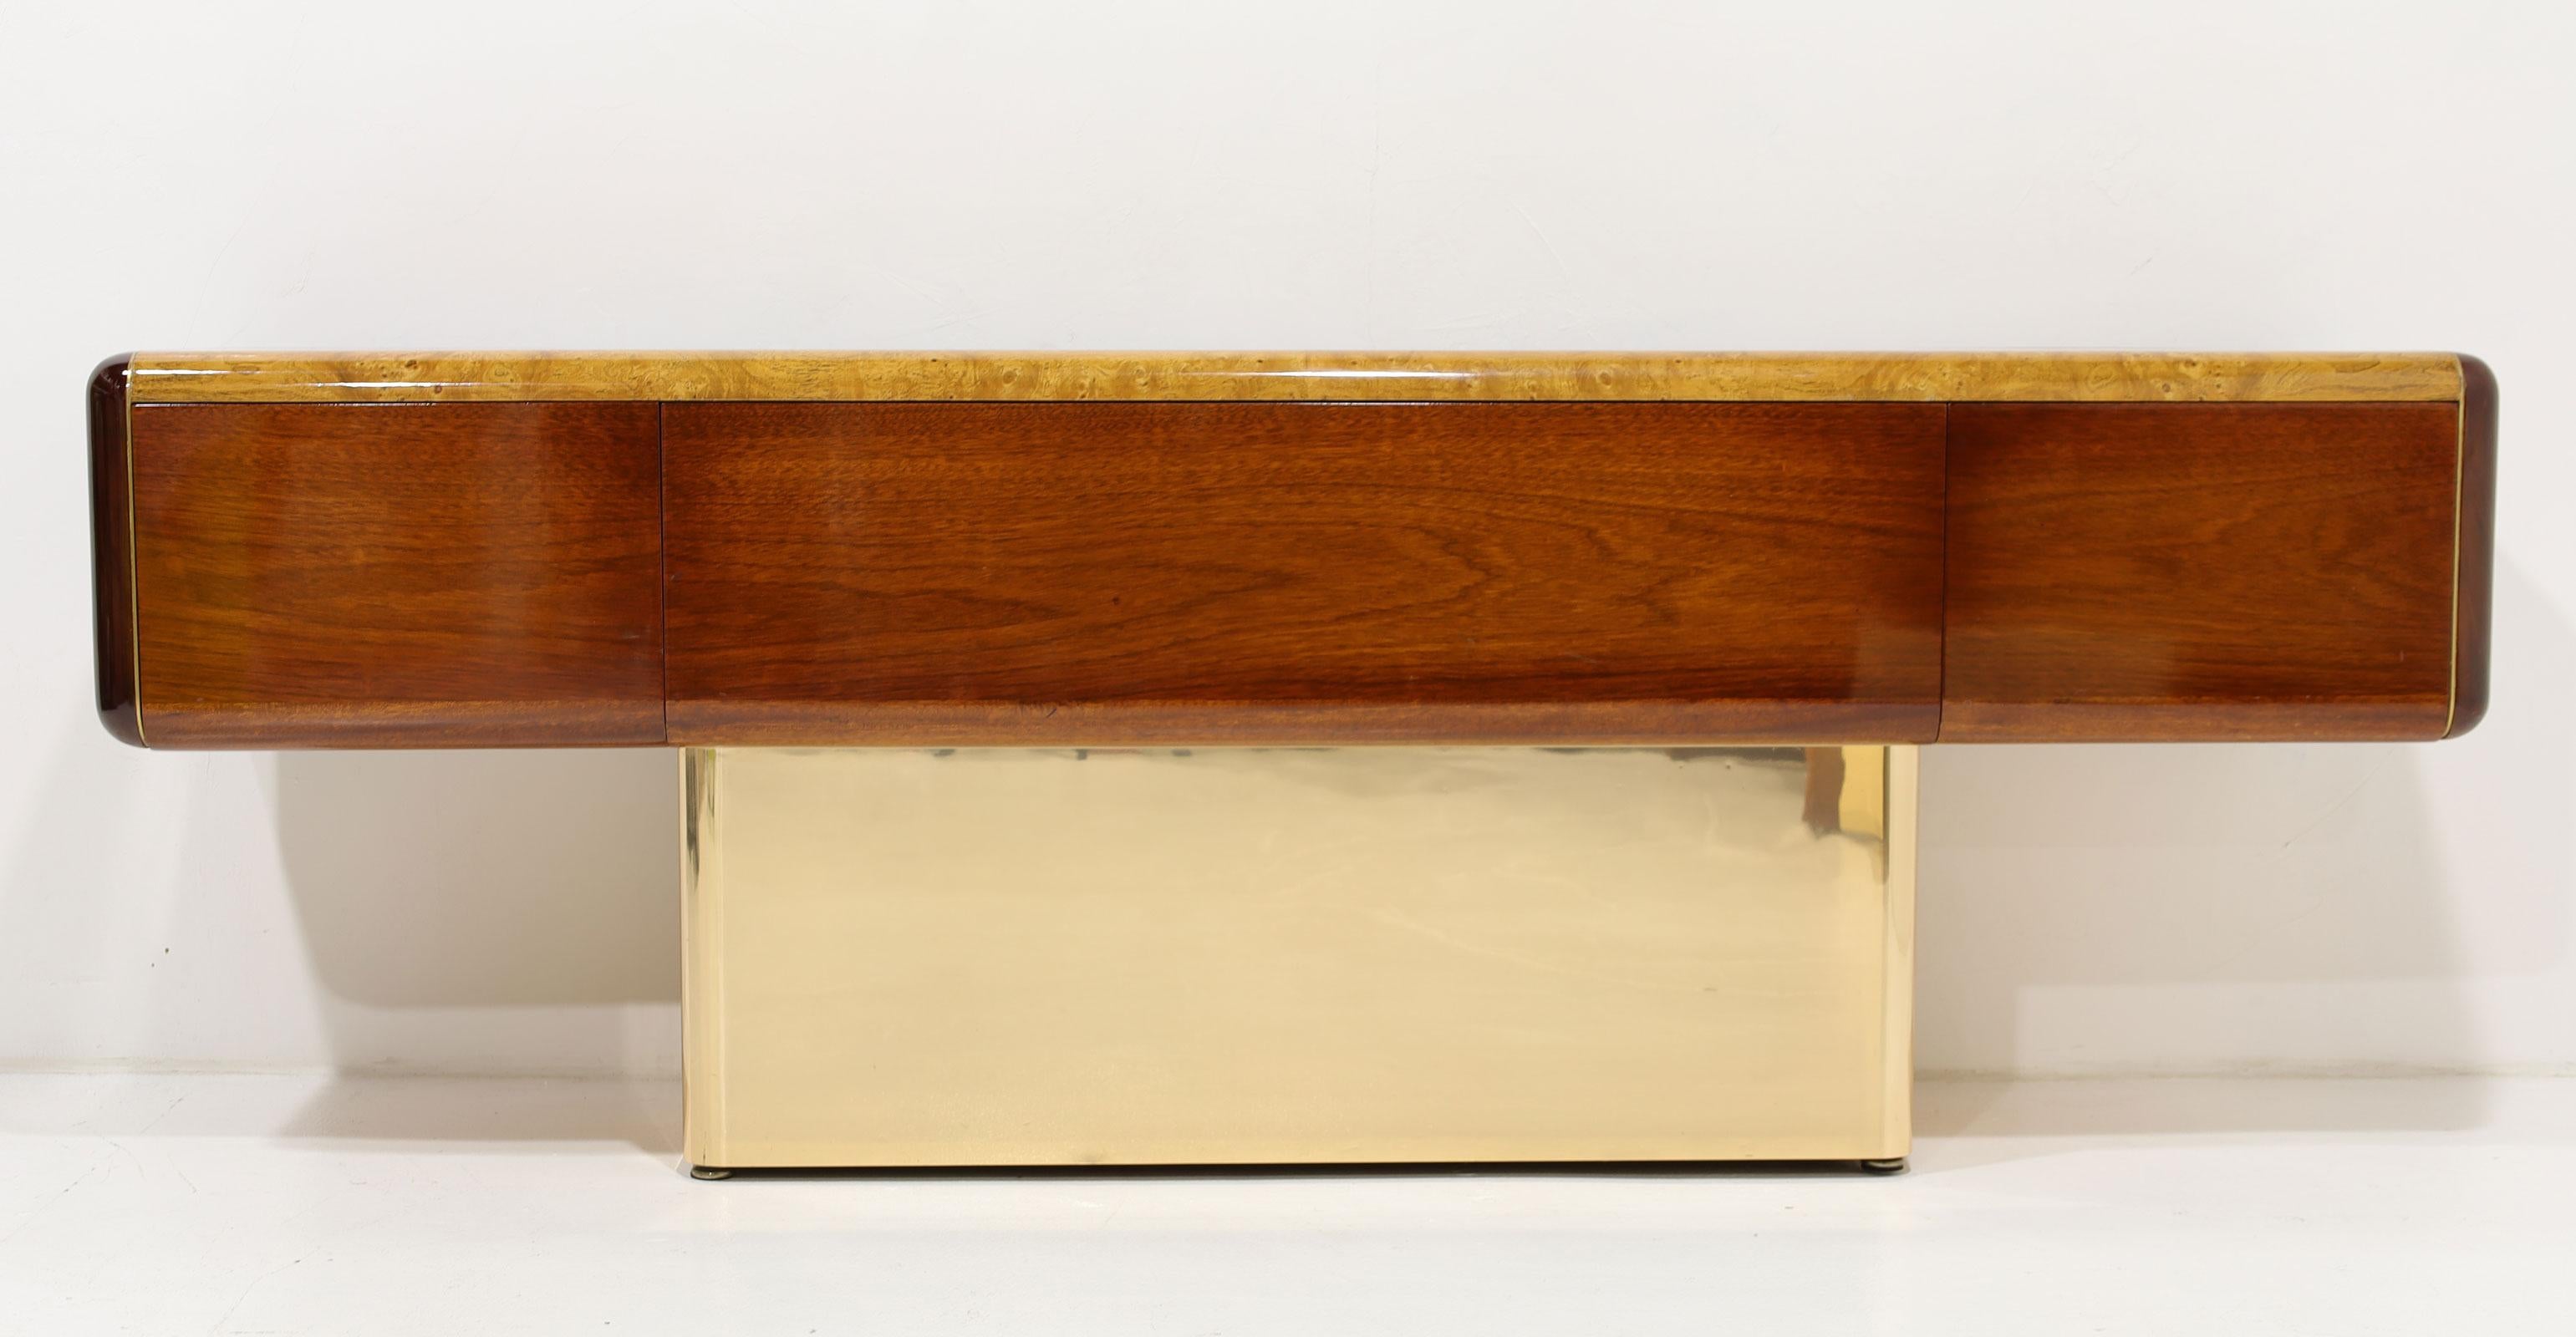 A stunning credenza by Vladimir Kagan Design Studio. Credenza floats on a wood base clad in a brass finished metal. There are three file drawers with hanging fixtures in place. Top is finished in burl wood with mahogany wood around all sides29500